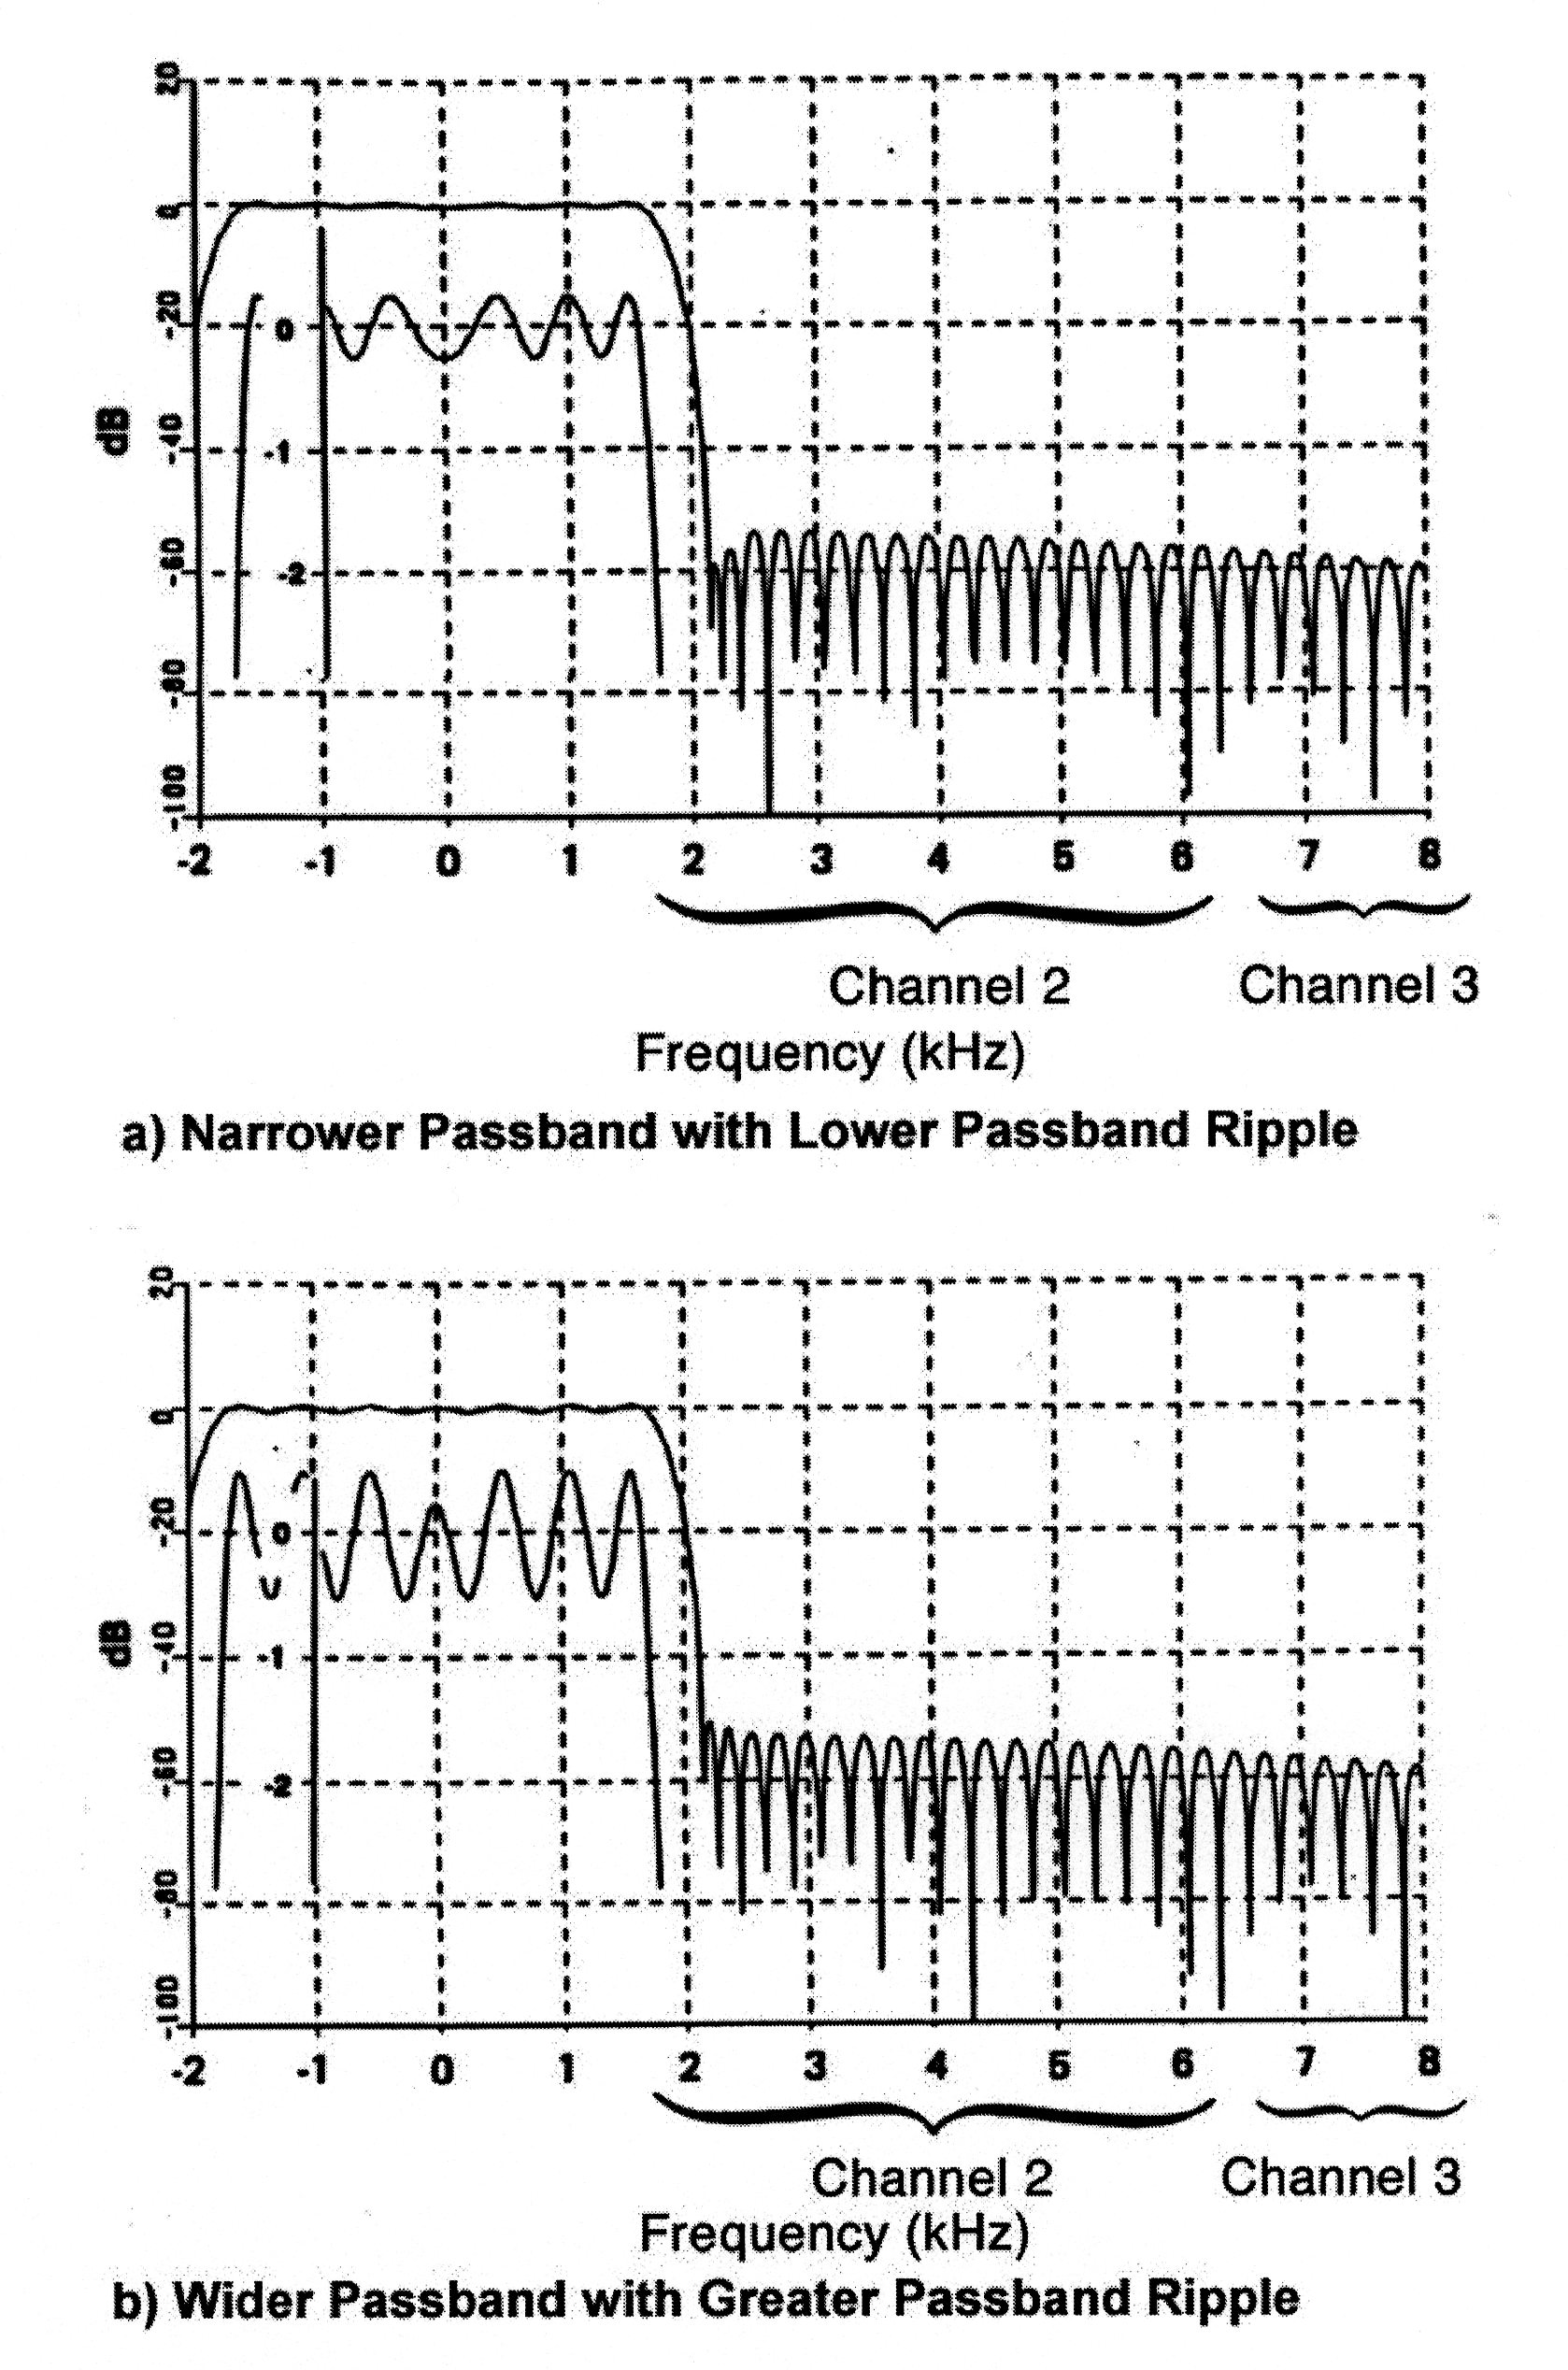  This figure is comprised of two graphs of waves. The first graph is labeled (a) Narrower Passband with Lower Passband Ripple. The y axis is labeled dB and ranges from -100 to 20 while the x axis is labeled Frequency (kHz) ranging from -2 to 8. There are two wave initially. The upper one is generally steady. It slopes up to about y=0 initially and stays flat alot y=0 until (2,0) where it begins to slope downward. The wave levels out at about y=-60 and wavers while gently sloping downward and to the left. The second wave slopes drastically up to about y=-20 and oscillates until about (1.5,-20) where it slopes drastically down. The area of the graph between x=2 and x=6 is labeled with a curly brace as Channel 2, and the area of the graph between x=7 and x=8 is labled with a curly brace Channel 3. The second graph is labeled (b) Wider Passband with Greater Passband Ripple and this graph looks pretty much the same as the first.